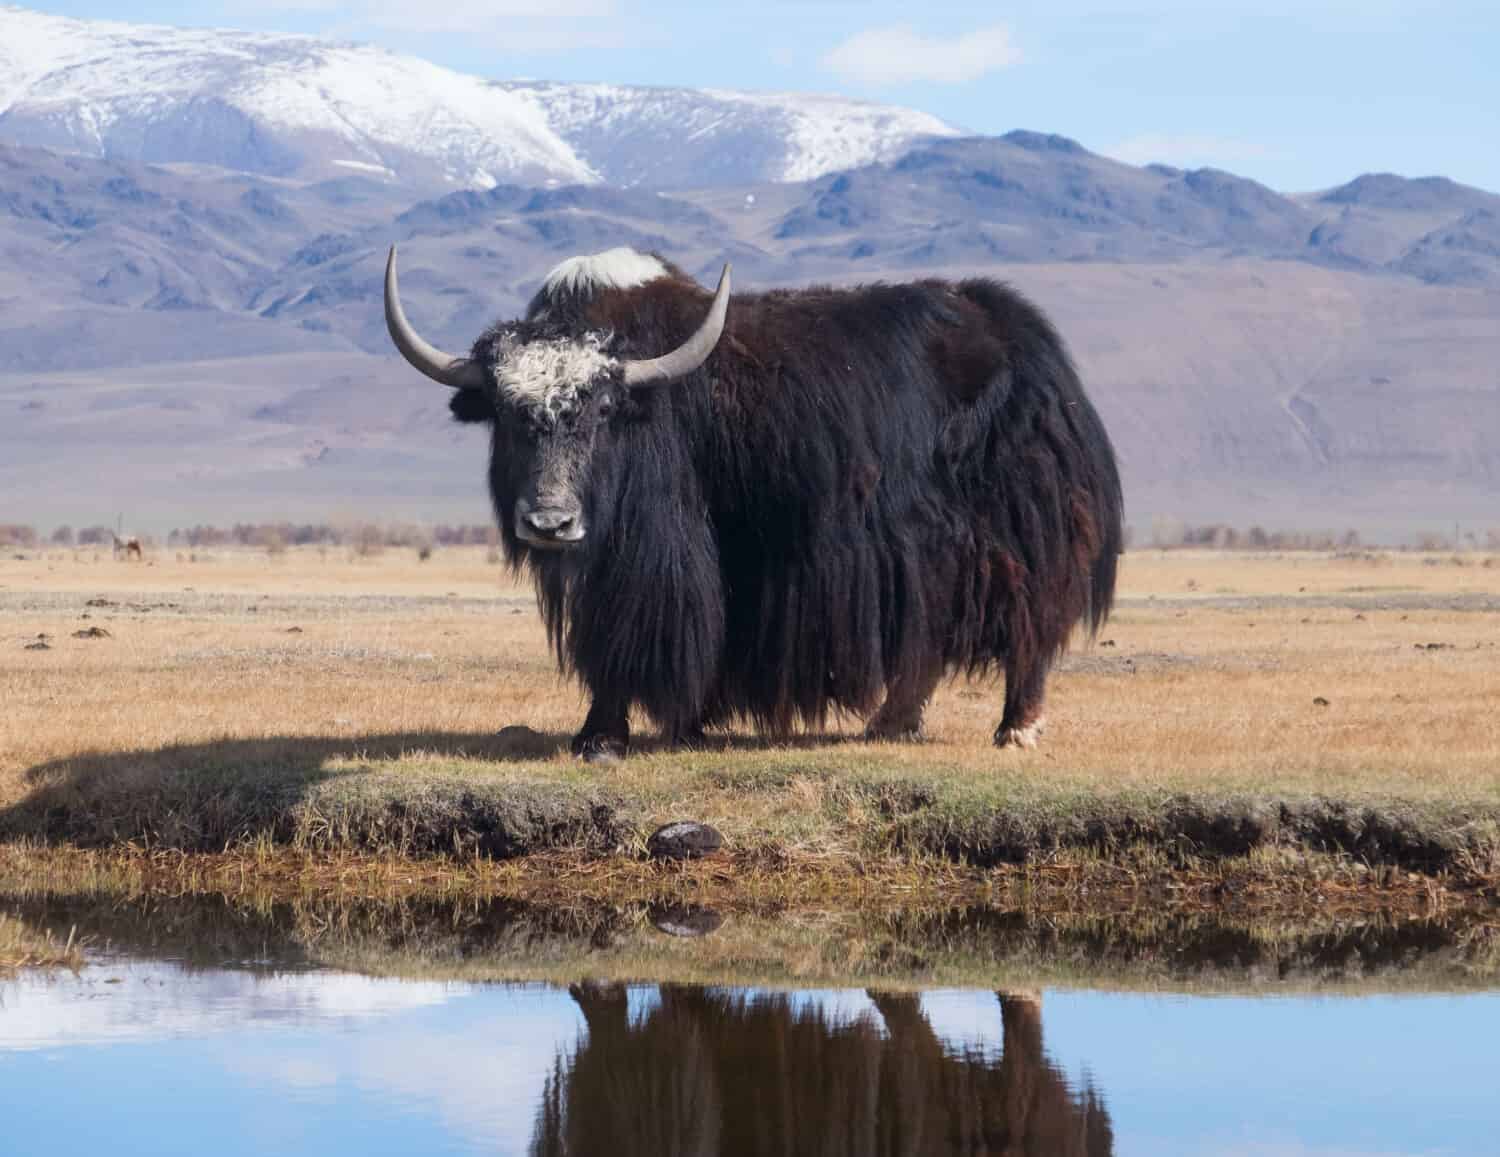 Black yak in the lake in the mountains